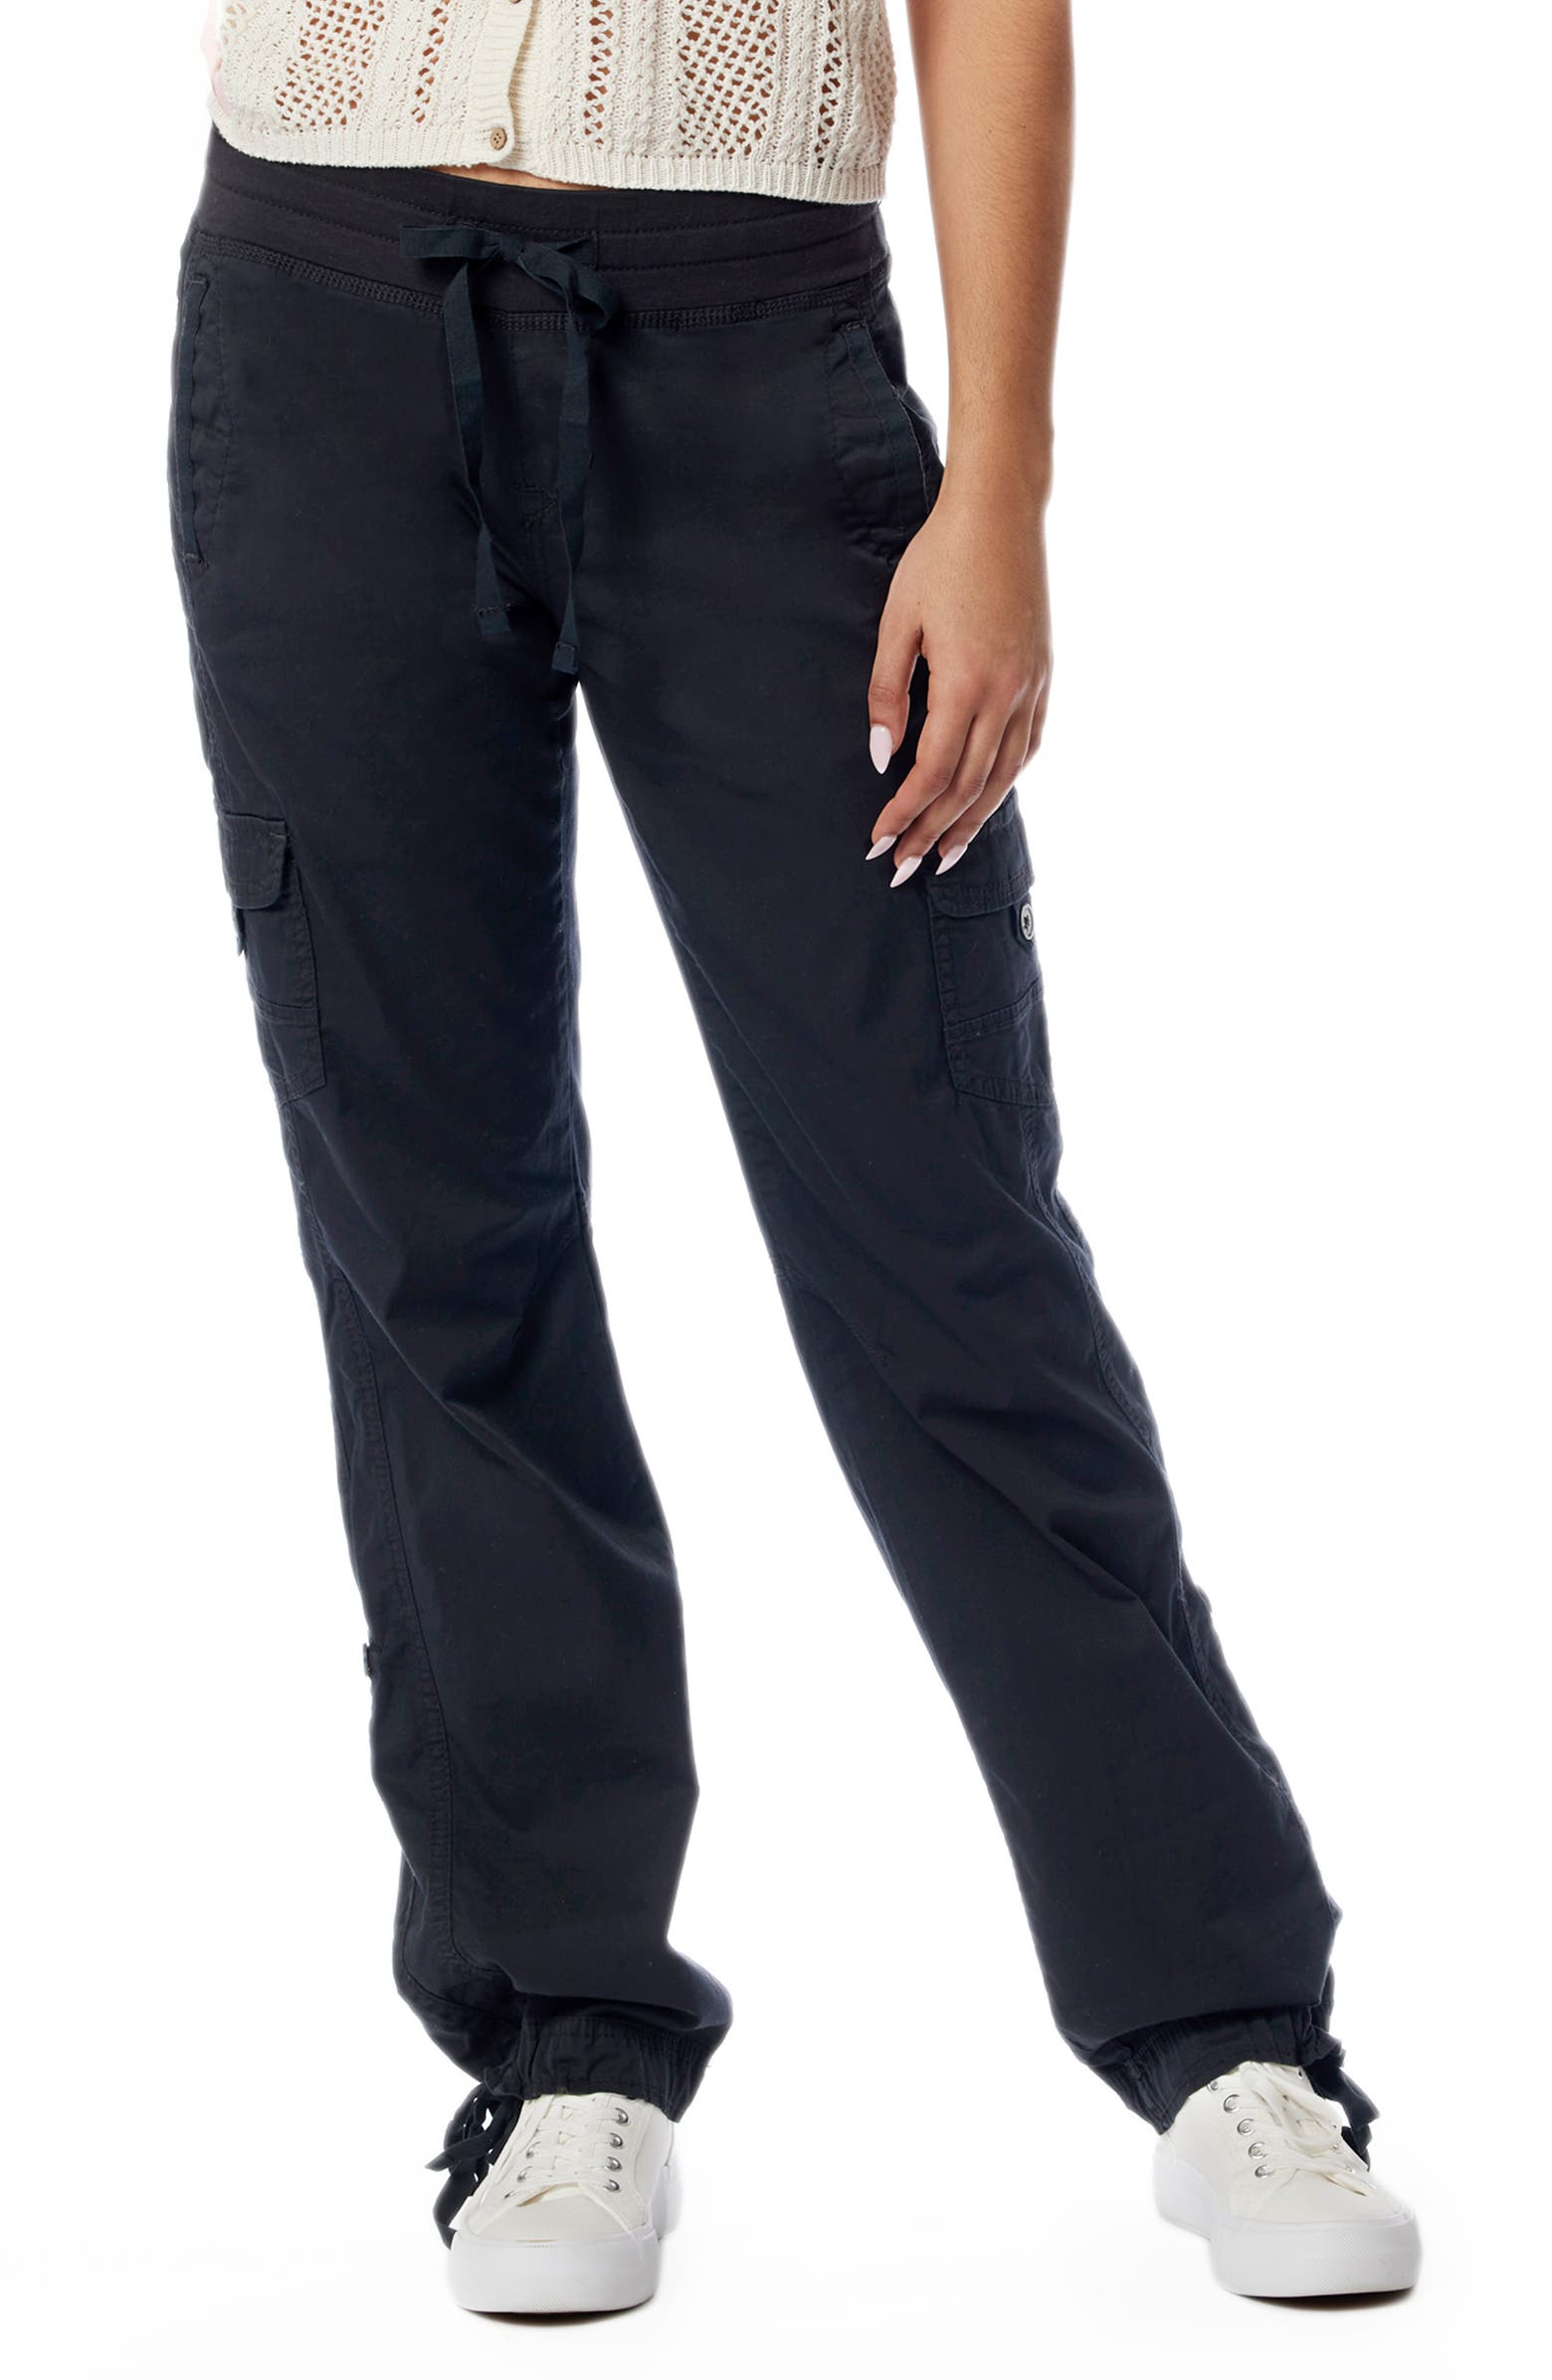 SUPPLIES BY UNION BAY Lilah Rolled Cargo Pants | Nordstromrack